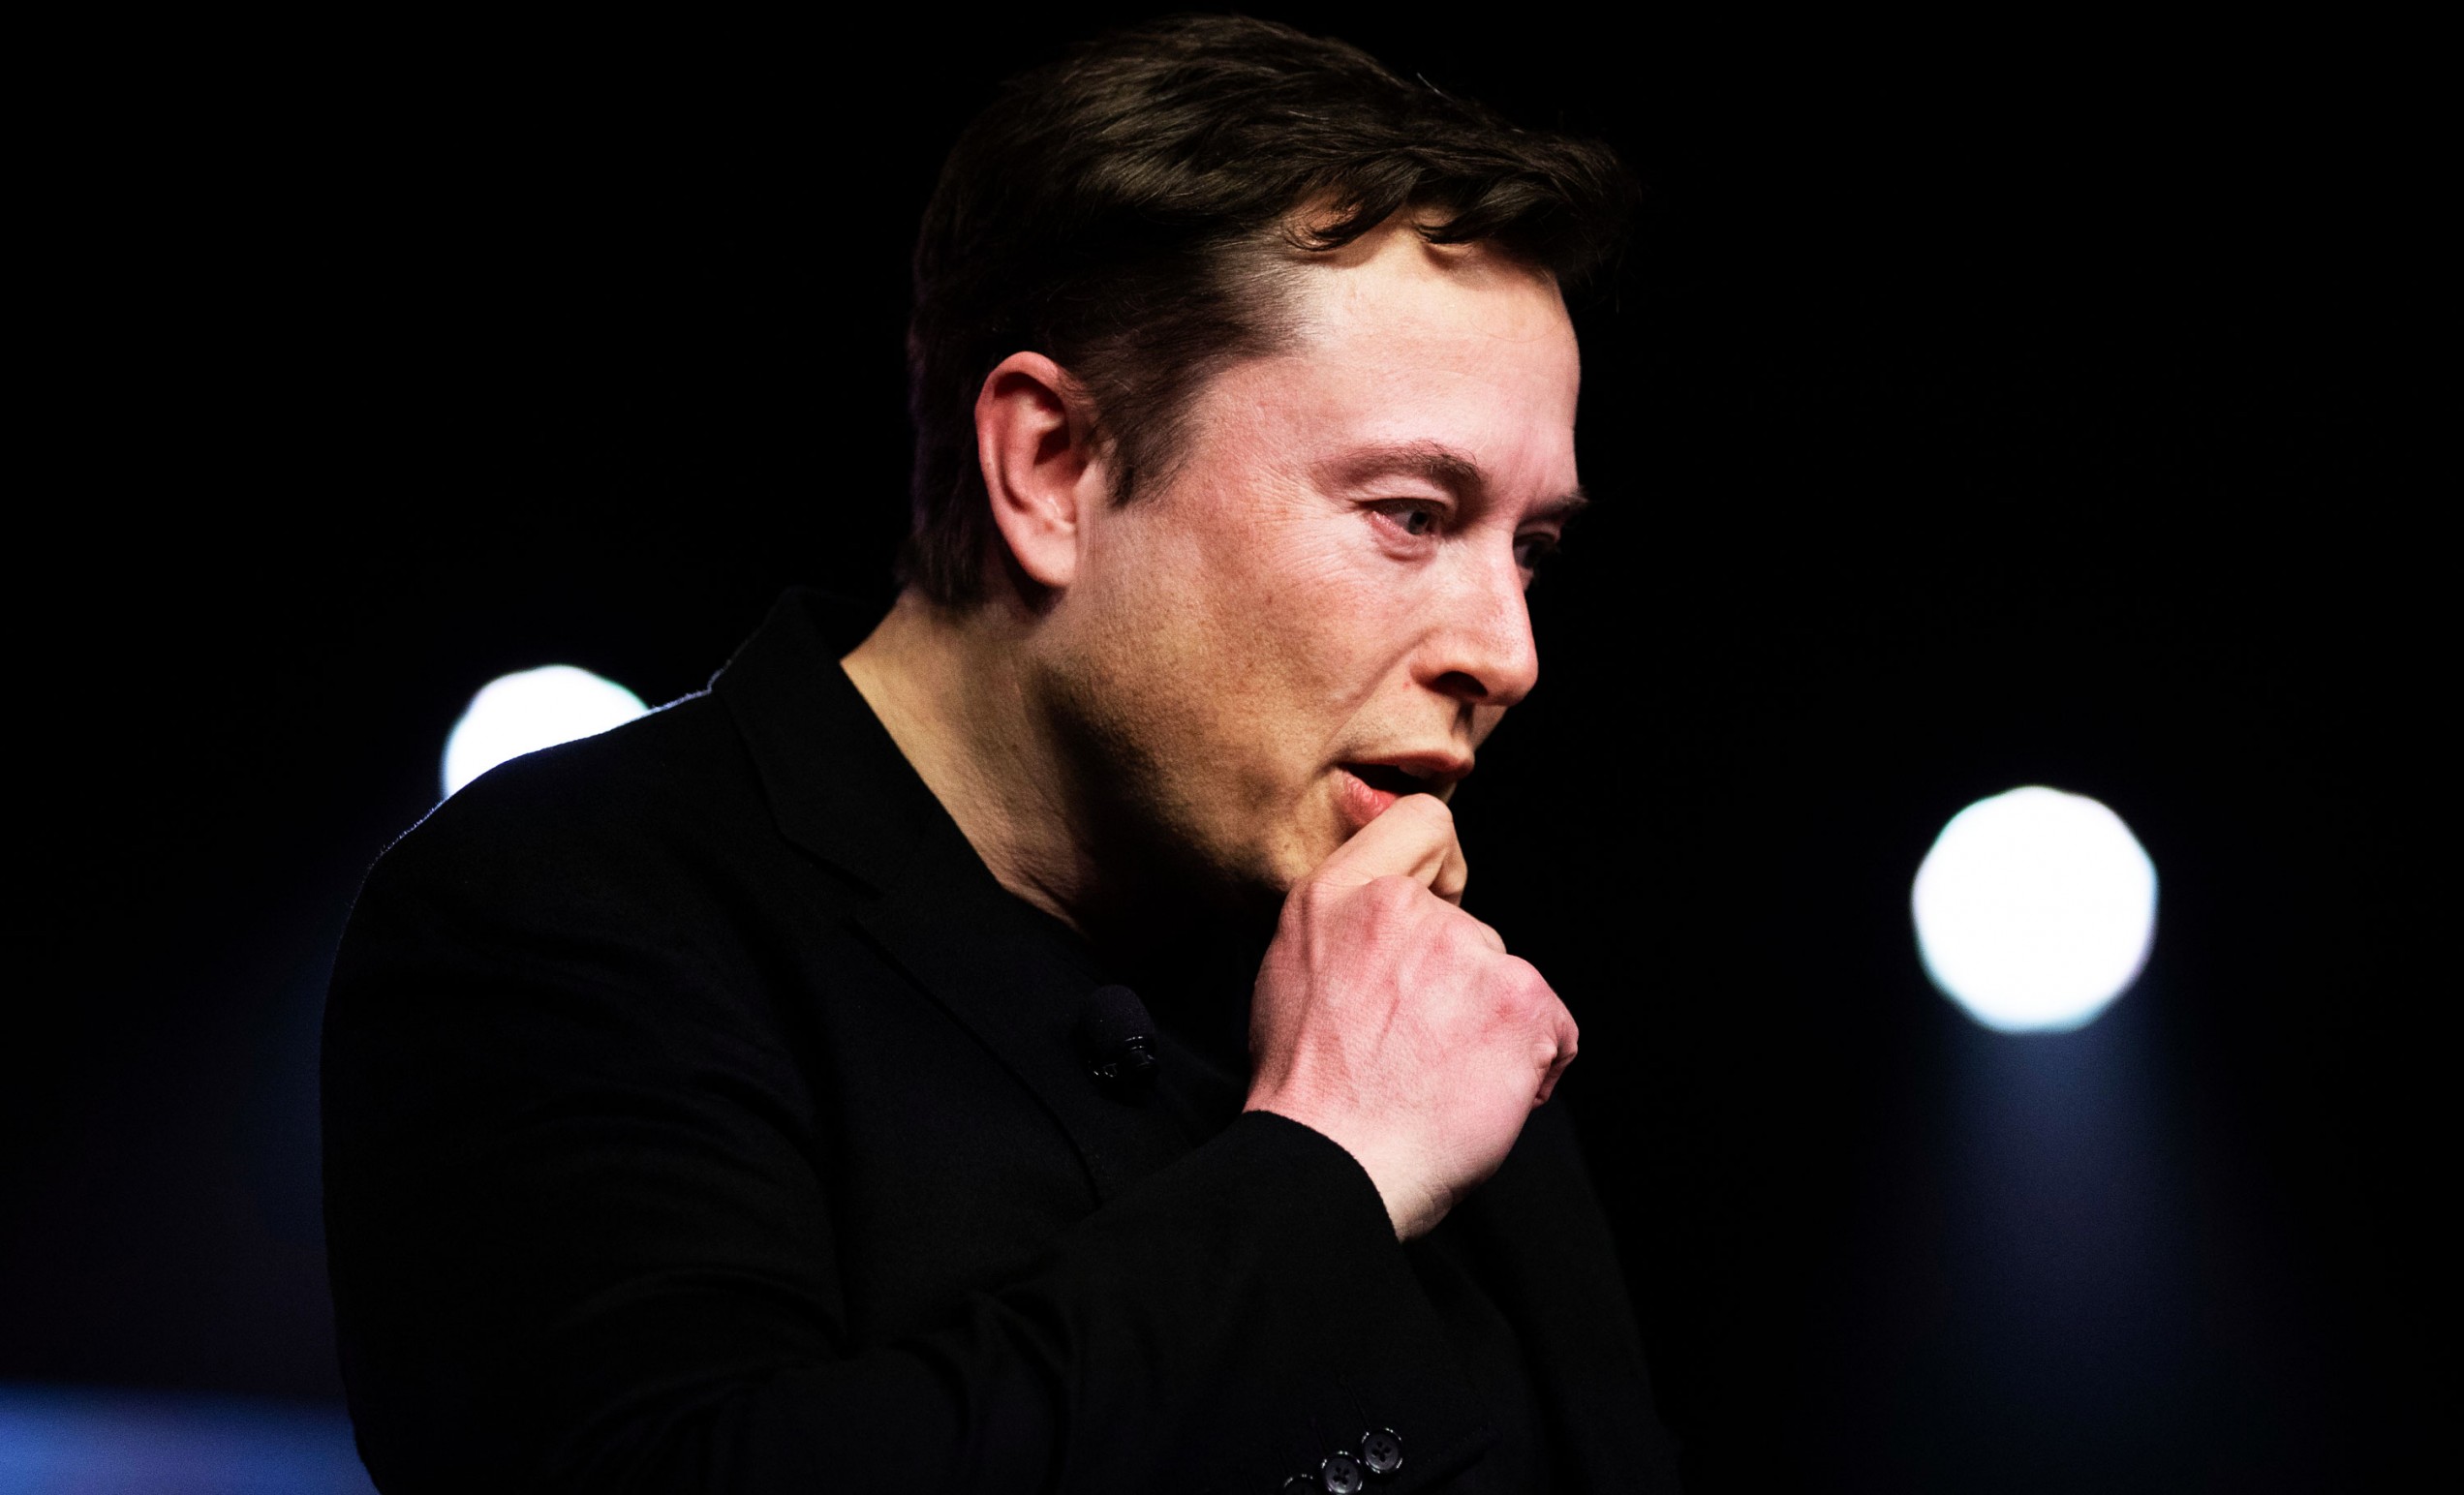 Elon Musk’s brain-interface company is promising big news. Here’s what it could be.